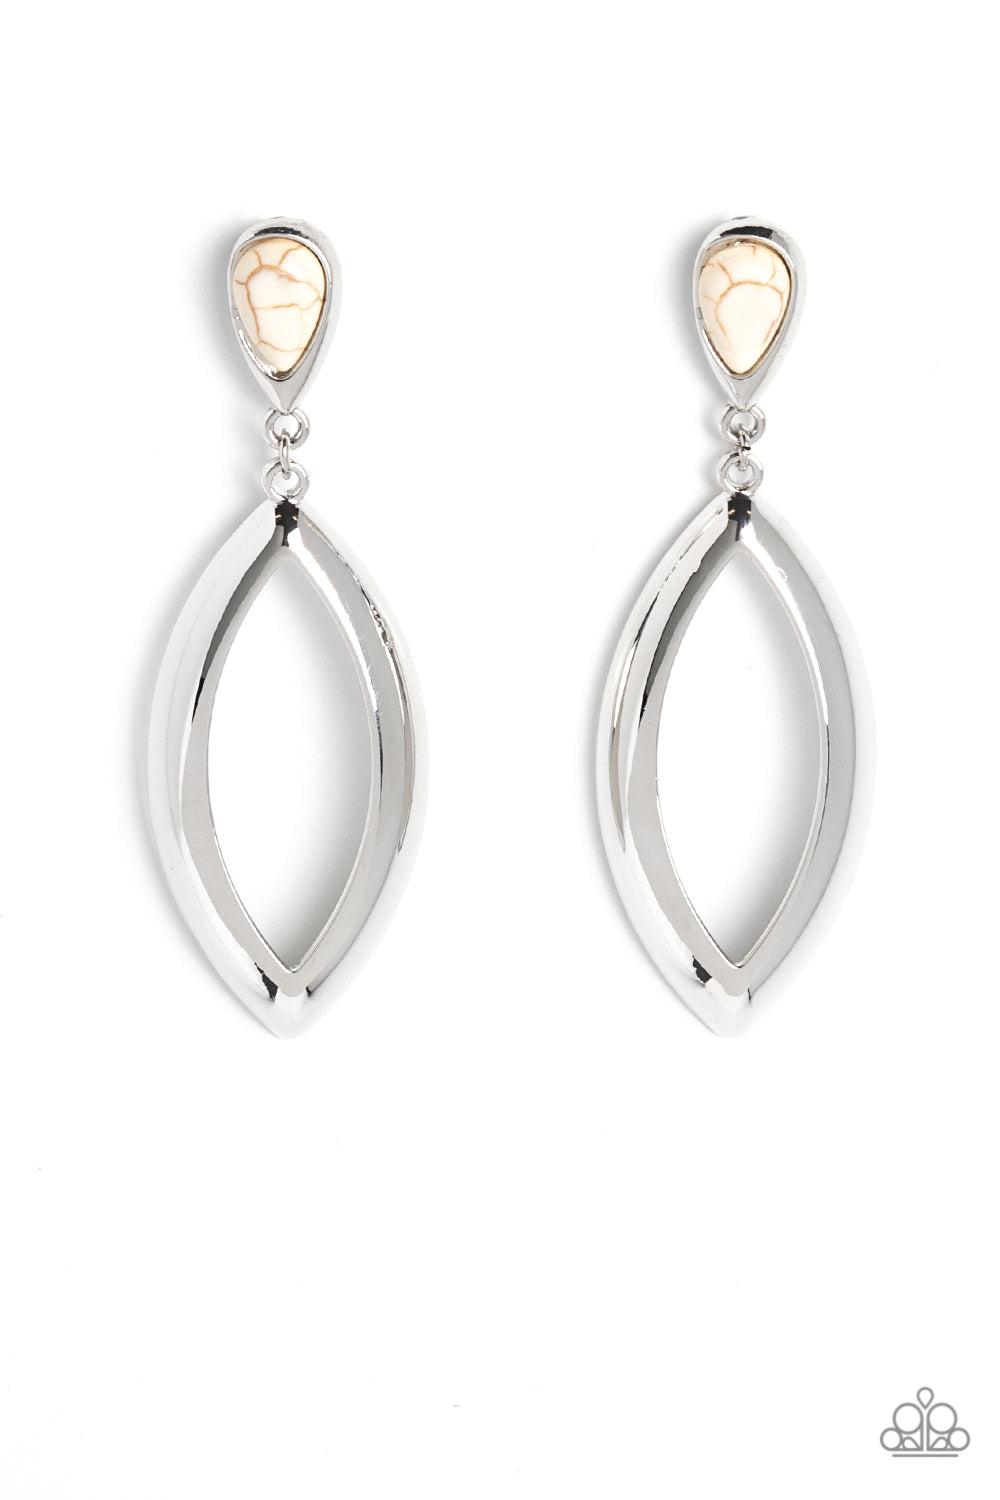 Artisan Anthem White Stone Earrings - Paparazzi Accessories- lightbox - CarasShop.com - $5 Jewelry by Cara Jewels